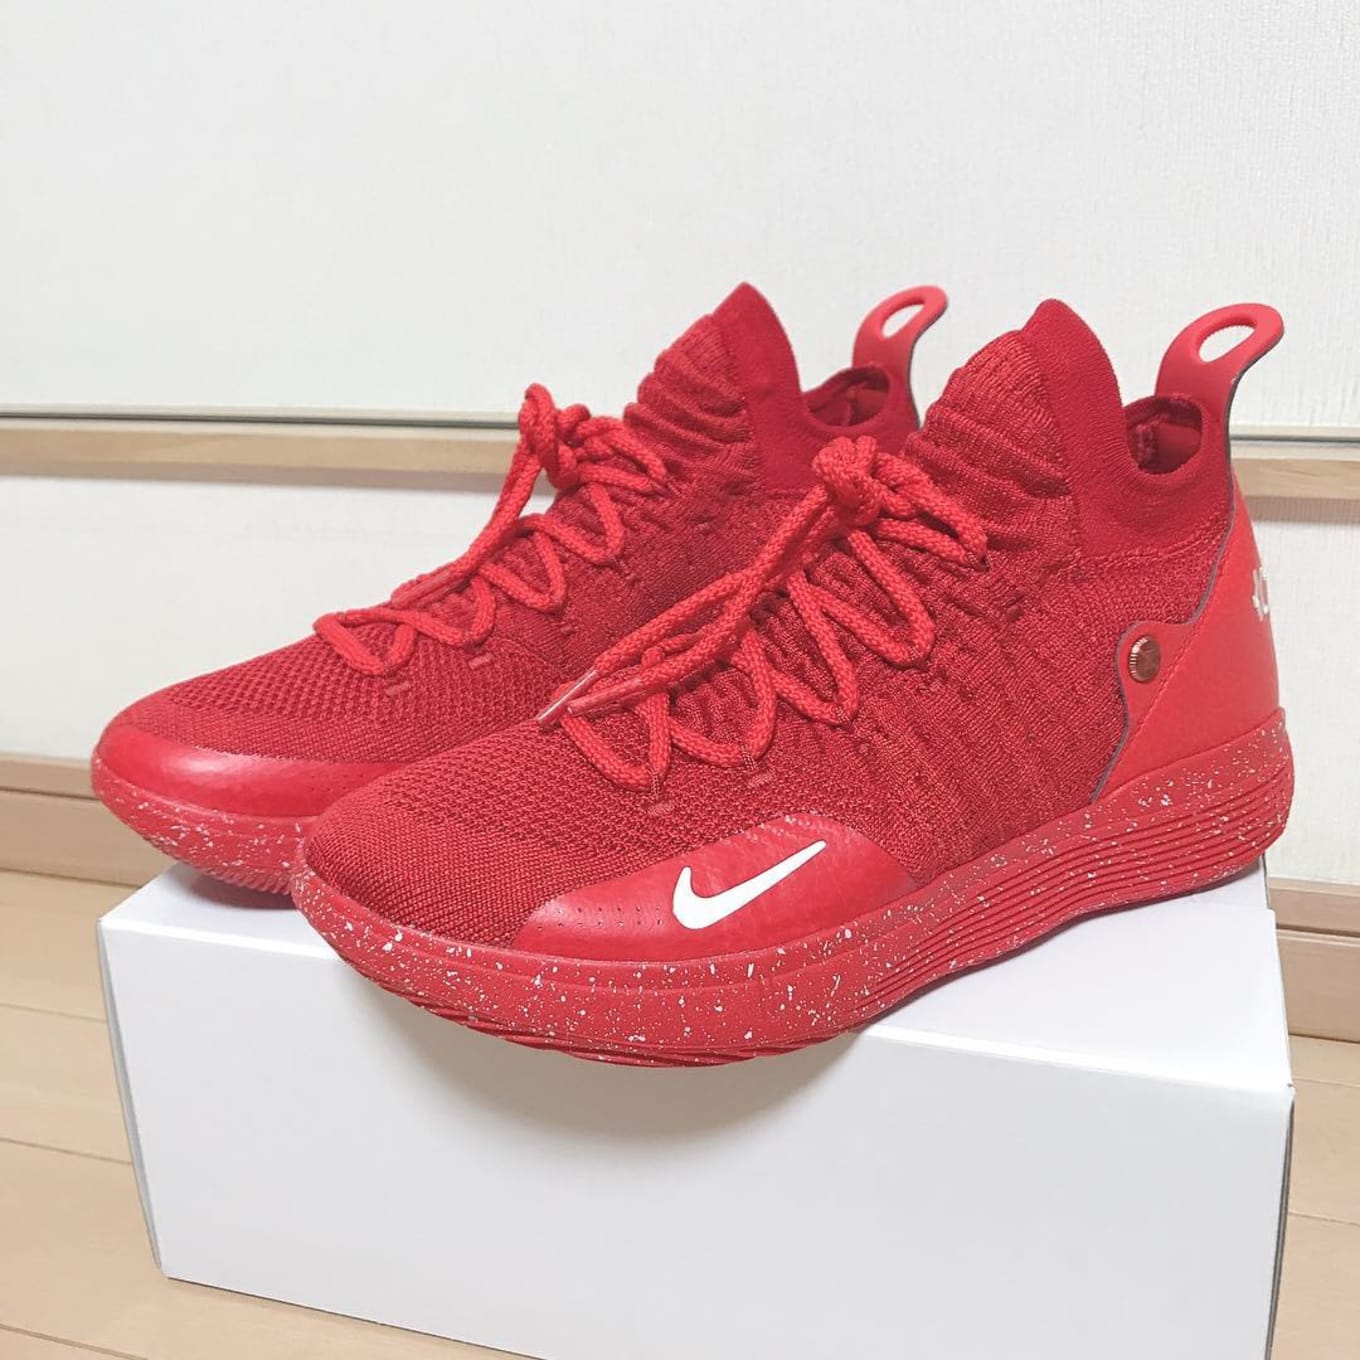 all red kd 11